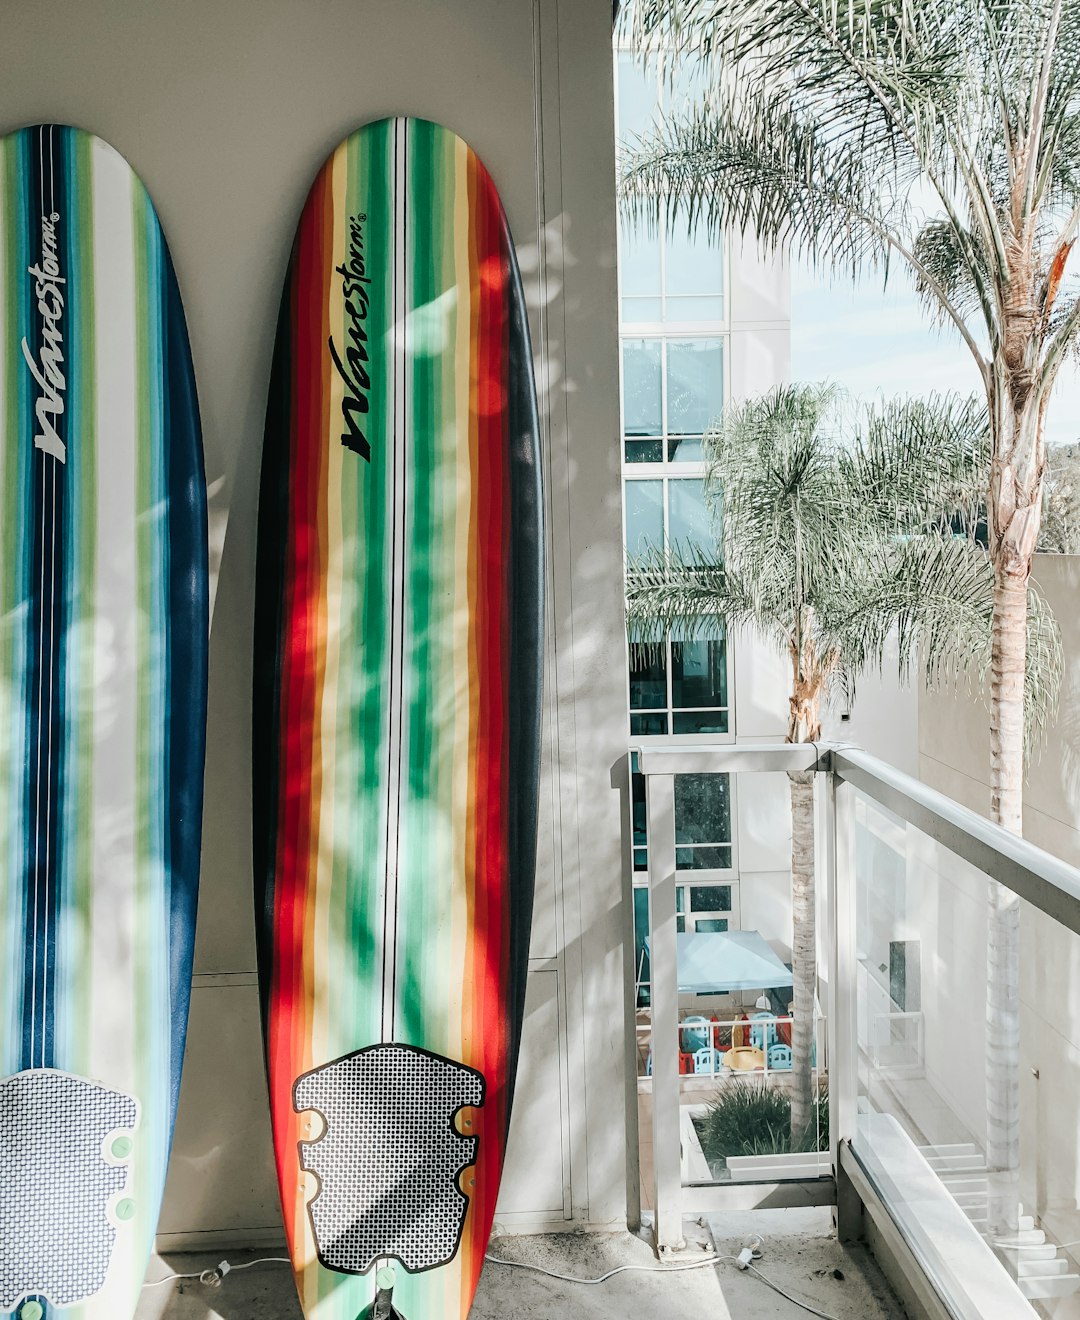 red white and blue striped surfboard